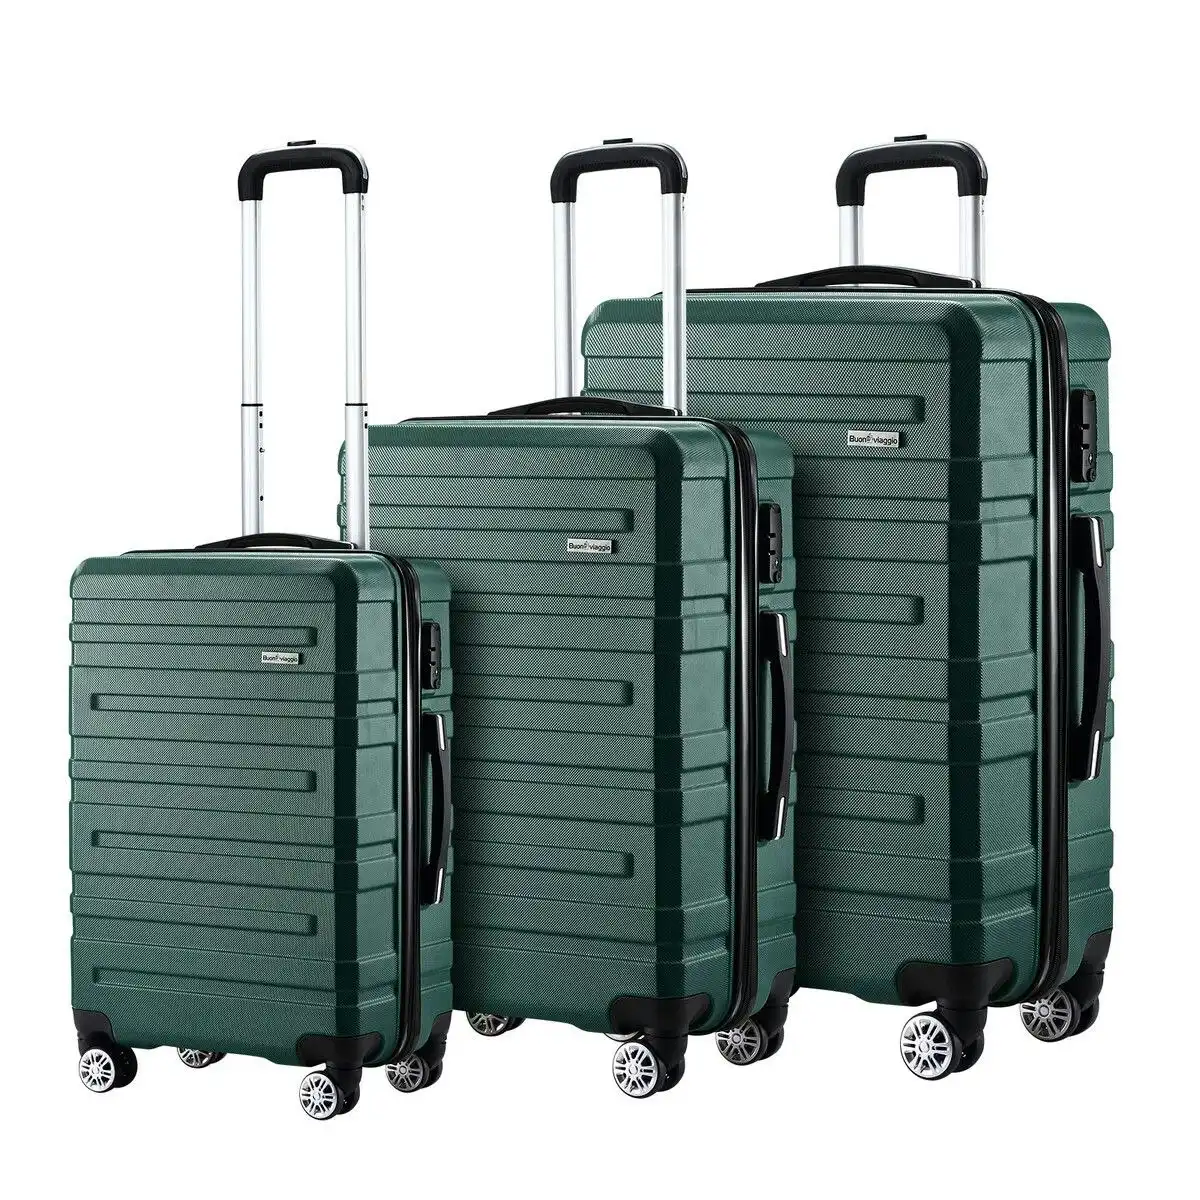 Buon Viaggio 3 Piece Luggage Set Hard Carry On Travel Suitcases Trolley Lightweight with TSA Lock and 2 Covers Green